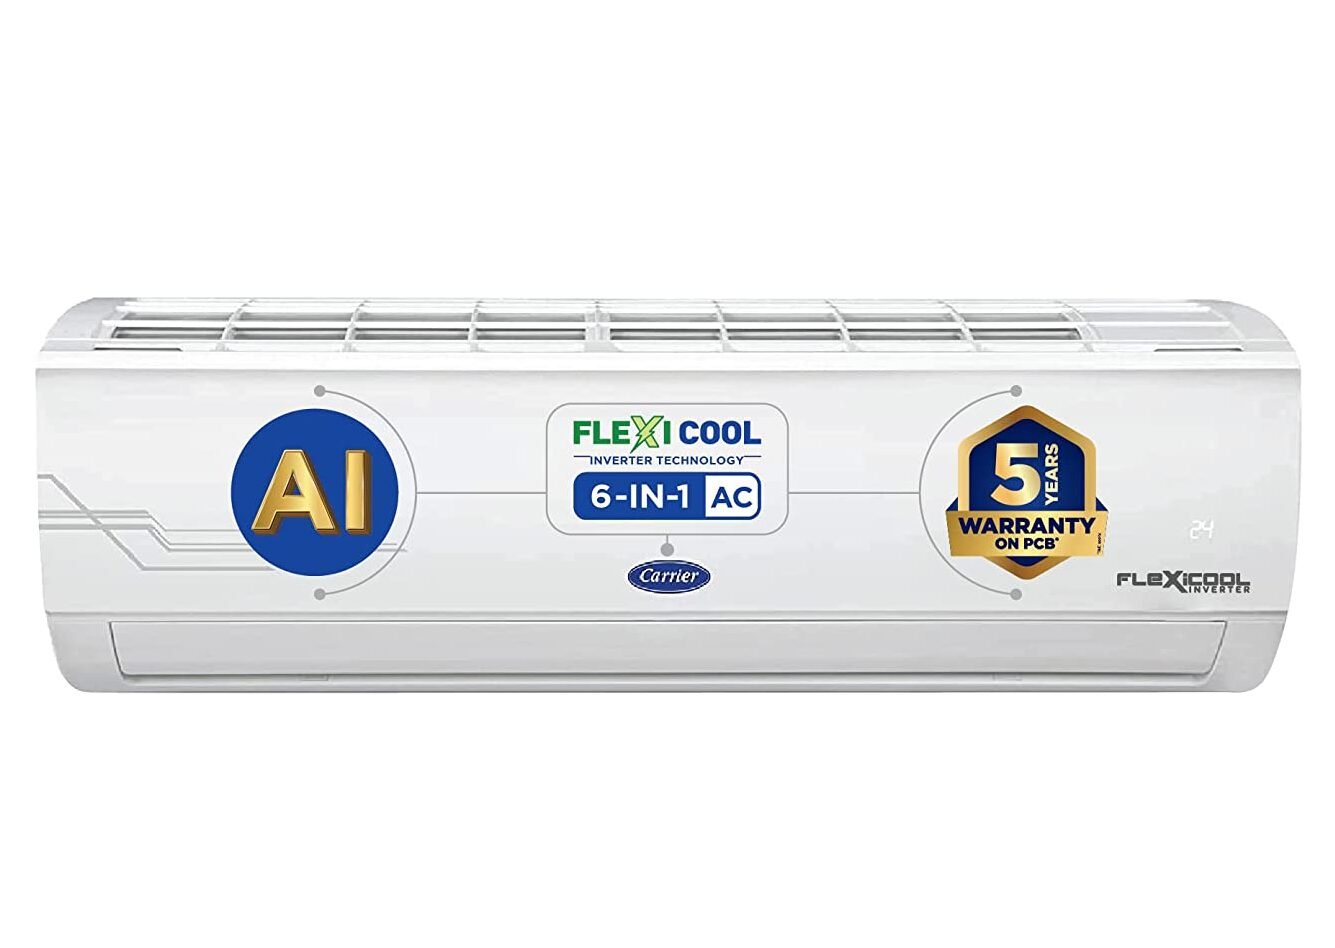 Carrier 1.5 Ton 5 Star AI Flexicool Inverter Split AC (Copper, Convertible 6-in-1 Cooling